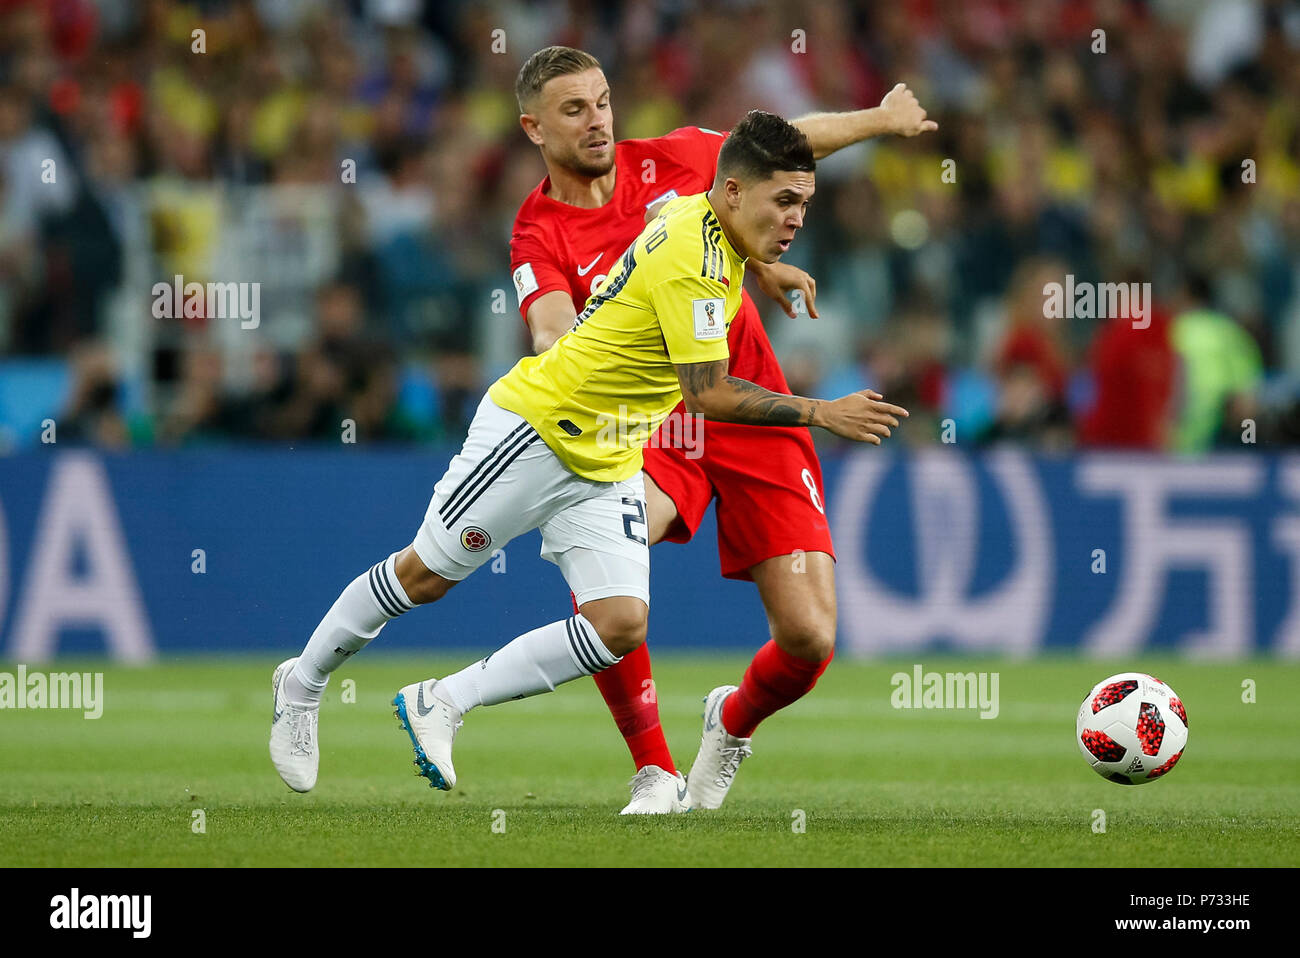 Moscow, Russia. 3rd July, 2018. Juan Quintero of Colombia and Jordan Henderson of England during the 2018 FIFA World Cup Round of 16 match between Colombia and England at Spartak Stadium on July 3rd 2018 in Moscow, Russia.Credit: PHC Images/Alamy Live News Stock Photo